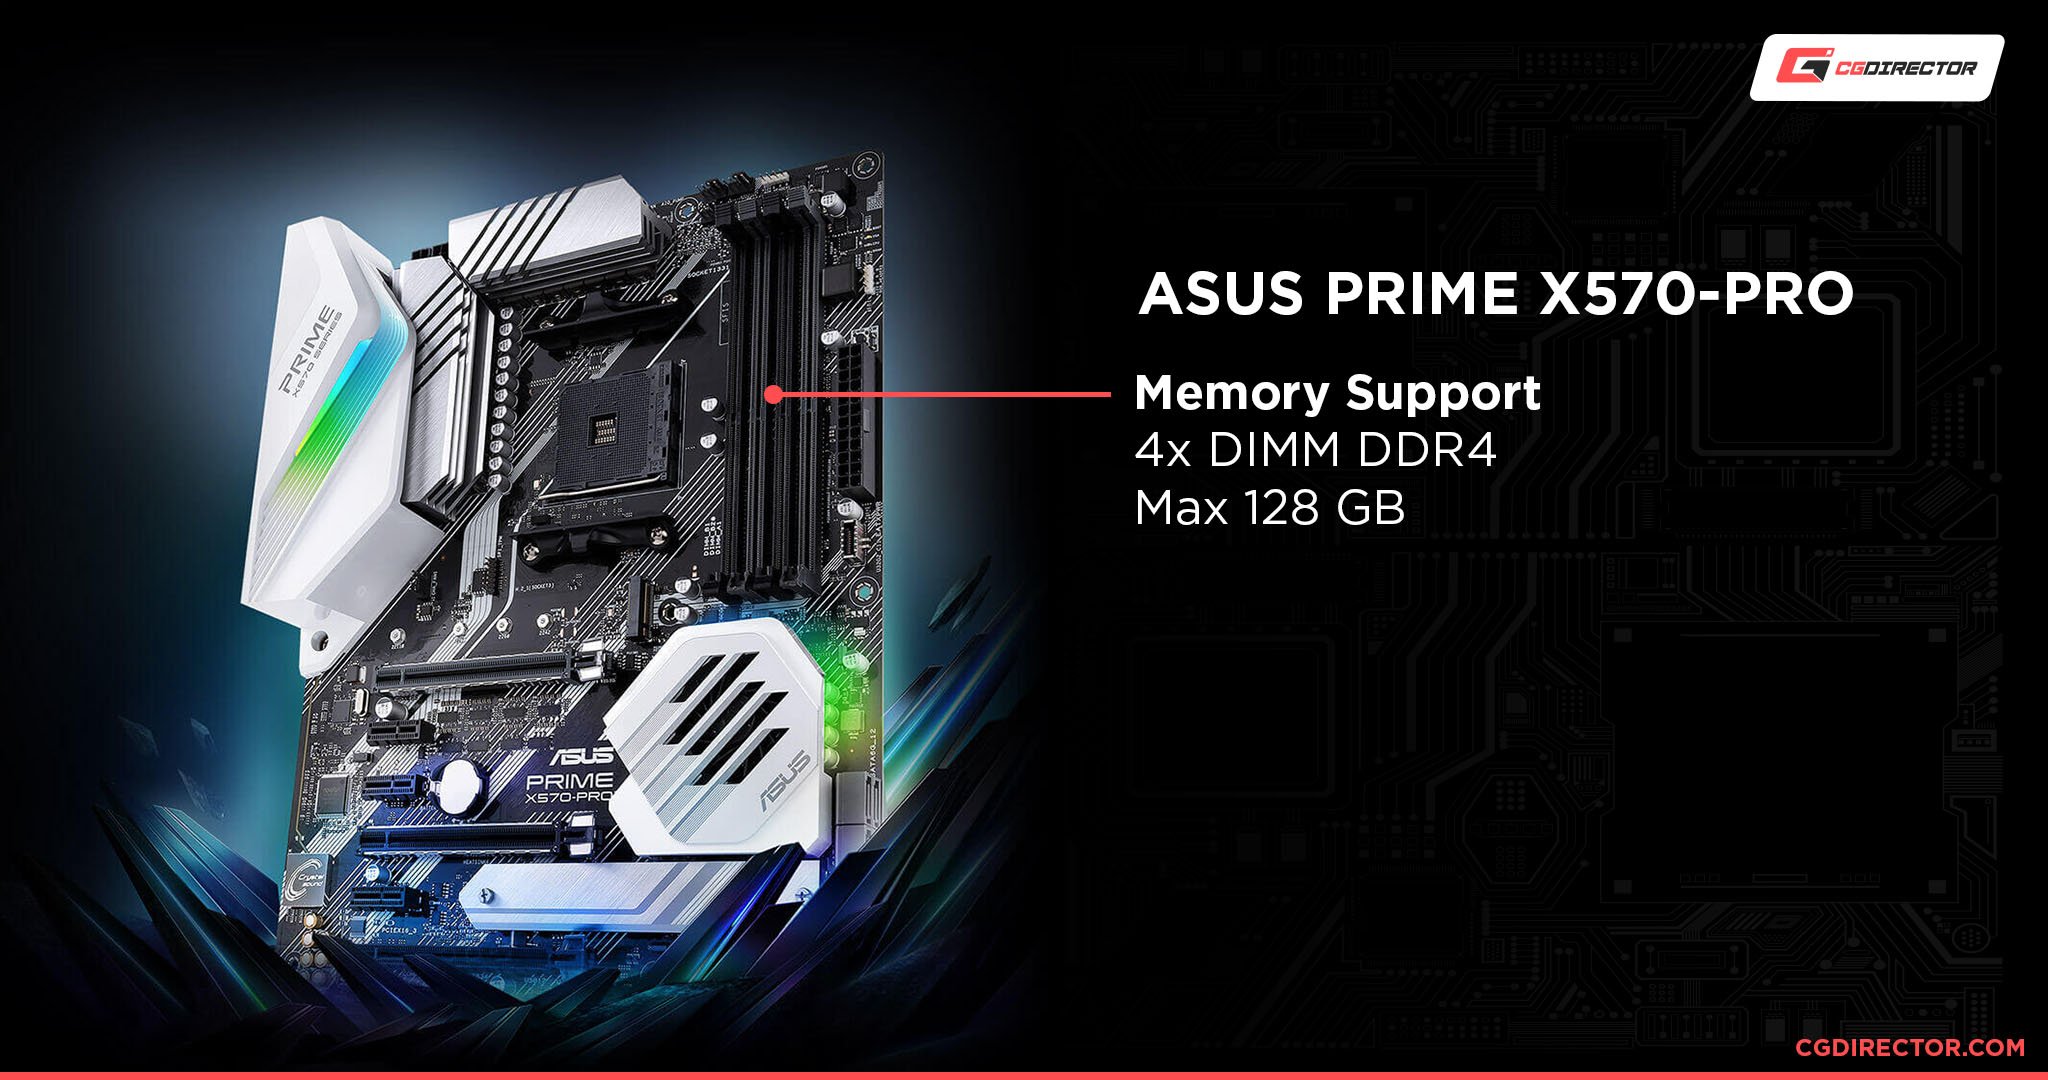 ASUS PRIME X570-PRO Memory Support